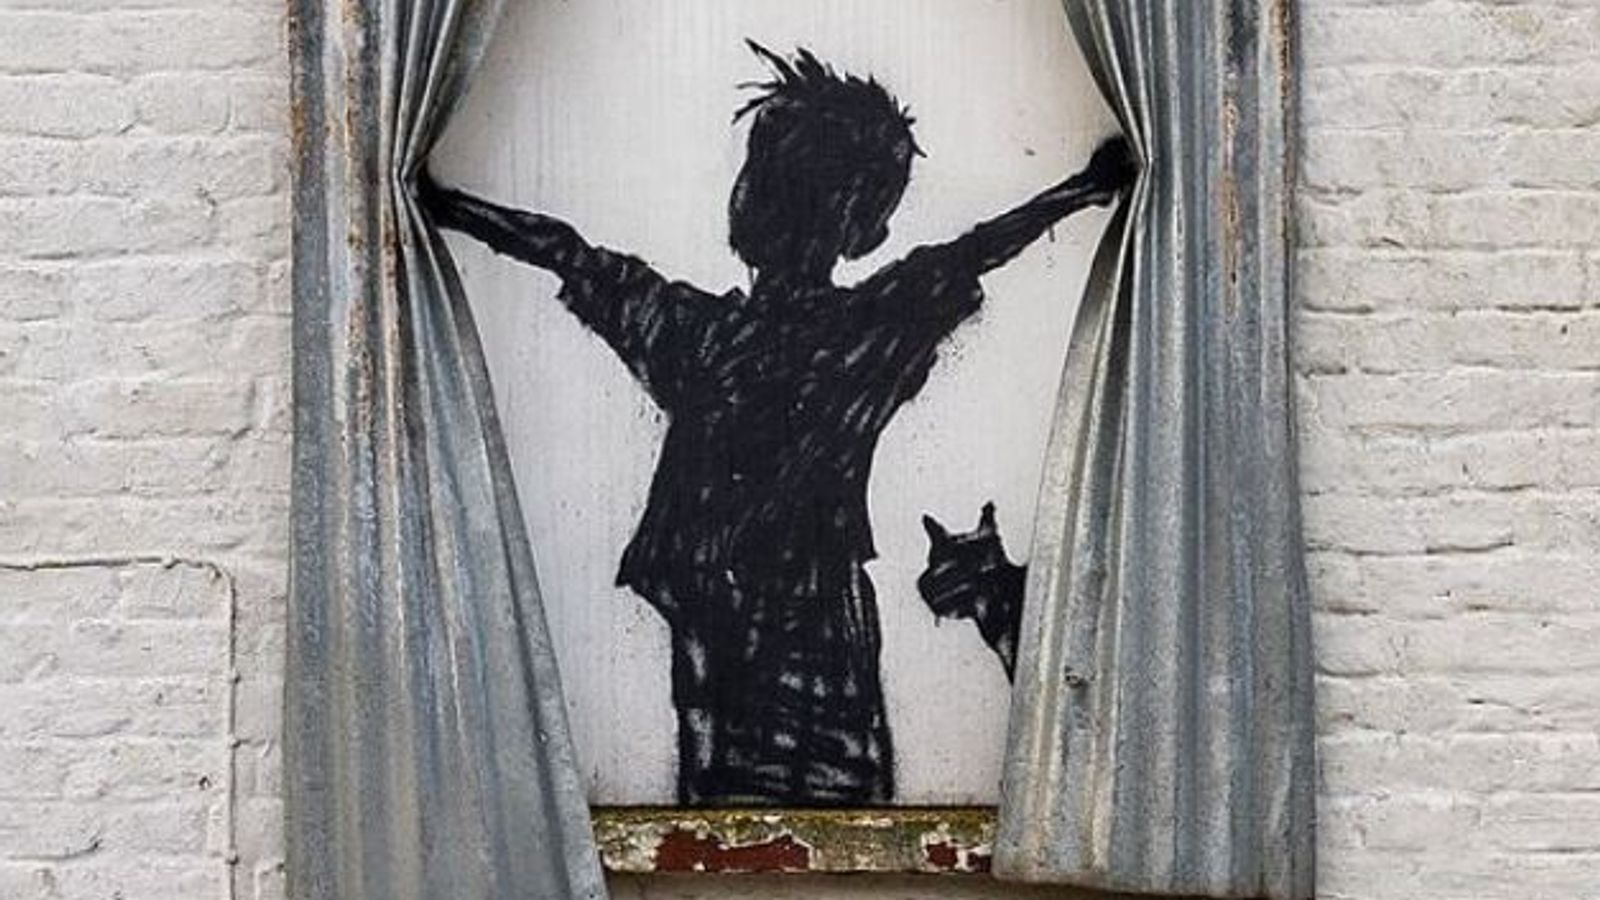 Banksy mural appears on derelict farmhouse in Kent's Herne Bay - but has it already been demolished?